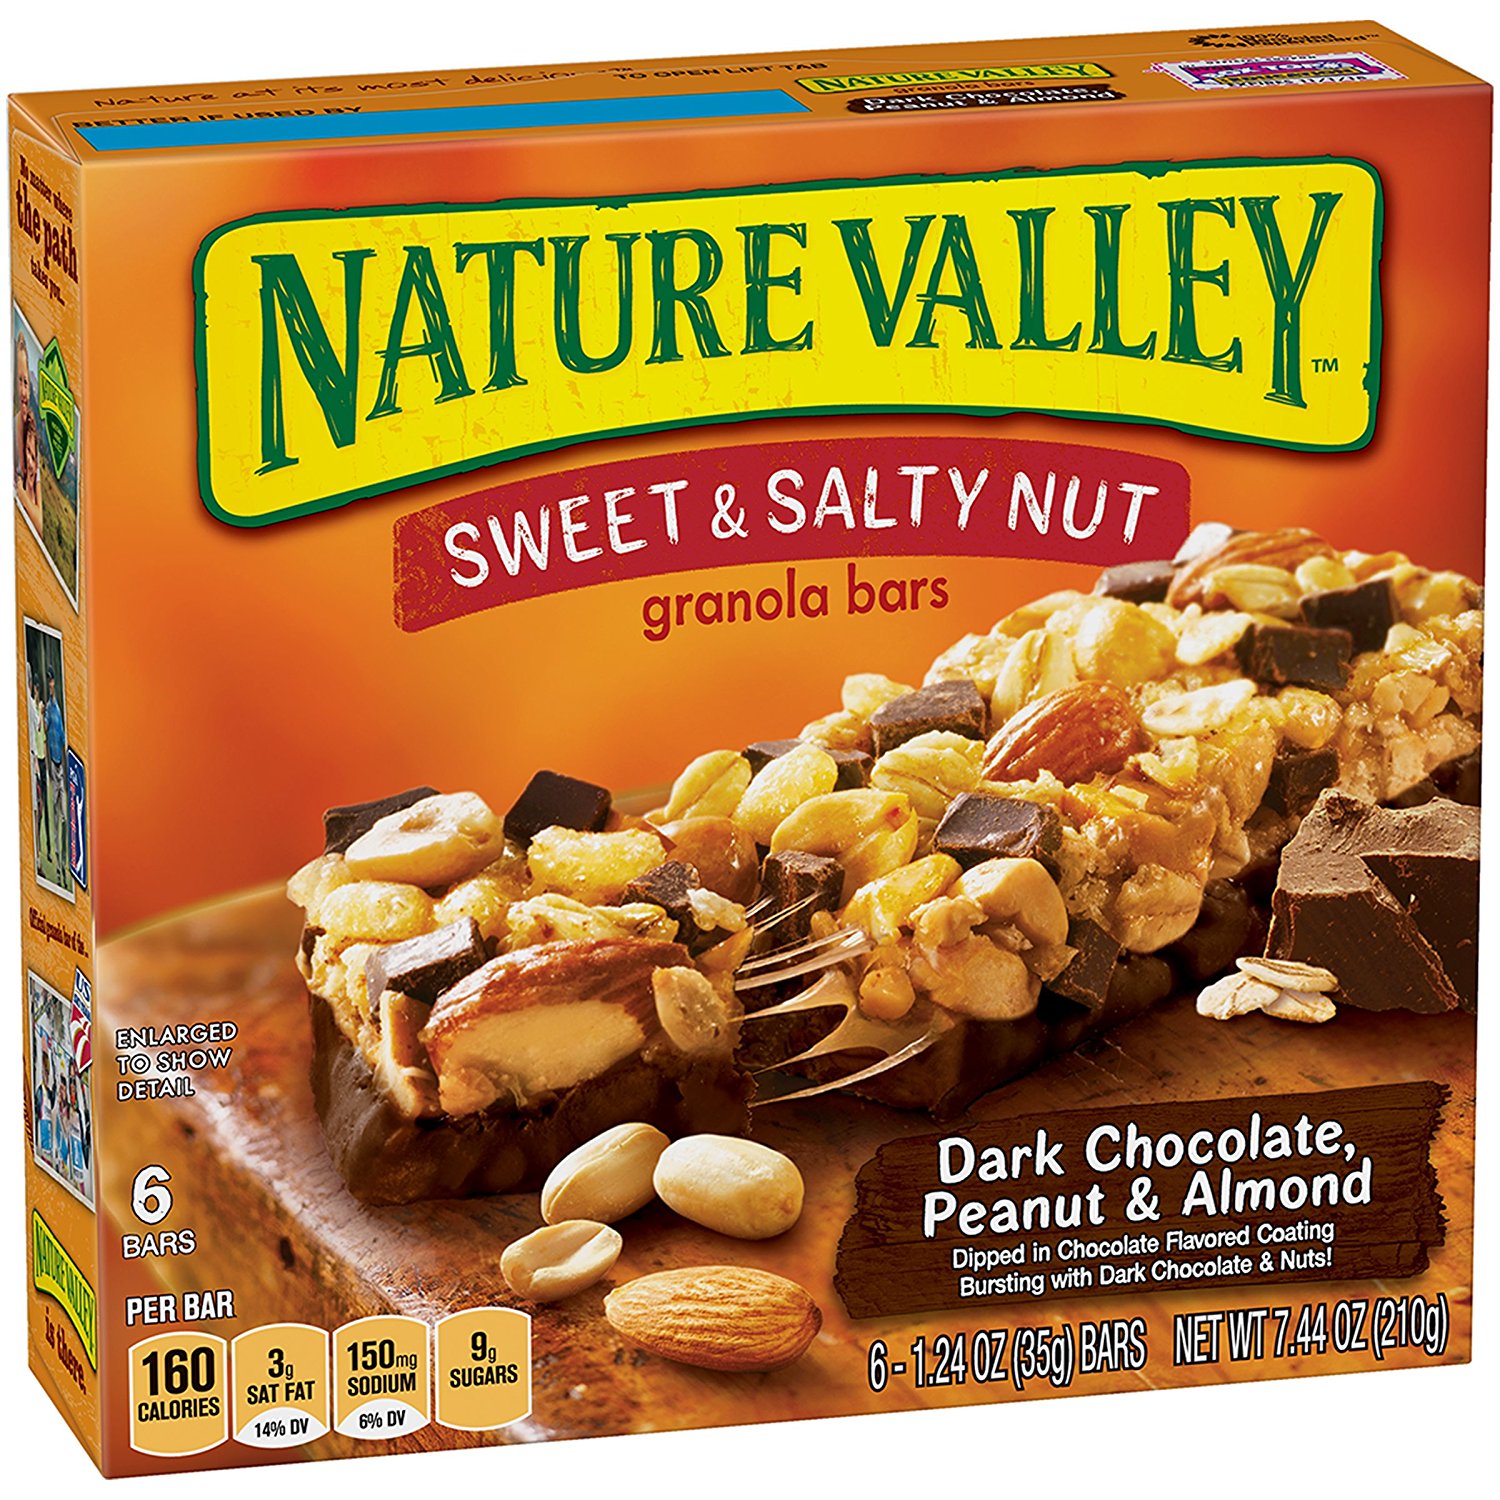 Nature Valley Granola Bars (Sweet & Salty Nut) Dark Chocolate Peanut & Almond 36 Count Only $11.25 Shipped!